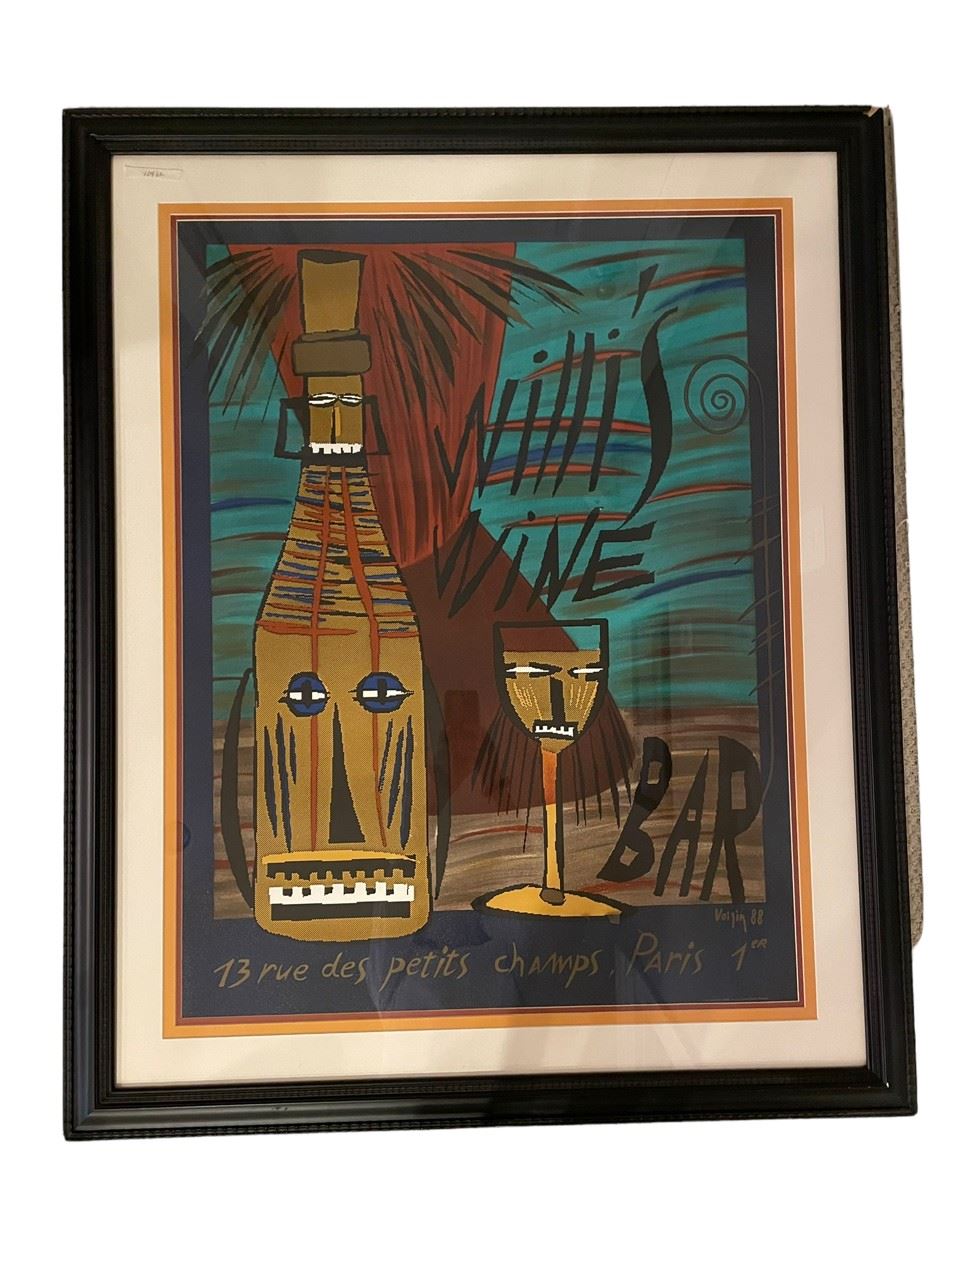 $125 USD     Vintage Art Deco Willi's Wine Bar Poster 13 Rue des Petits Champs. Paris LL52-10982    Description : A "Tiki" design typical of the 80s. Makes you want to go back to Tahiti! 
Condition Desc. : Beautifully framed.  Please refer to photos for a more detailed look at condition. We make every attempt to list and photograph any defects or signs of wear that are significant to this sale.
Measurements:  36 x 44"
Local pick up : Bethesda, MD.  Contact us for shipper suggestions.     https://goodbyhello.com/products/vintage-art-deco-willis-wine-bar-poster-13-rue-des-petits-champs-paris-ll52-10982?_pos=1&_sid=1d22691b8&_ss=r